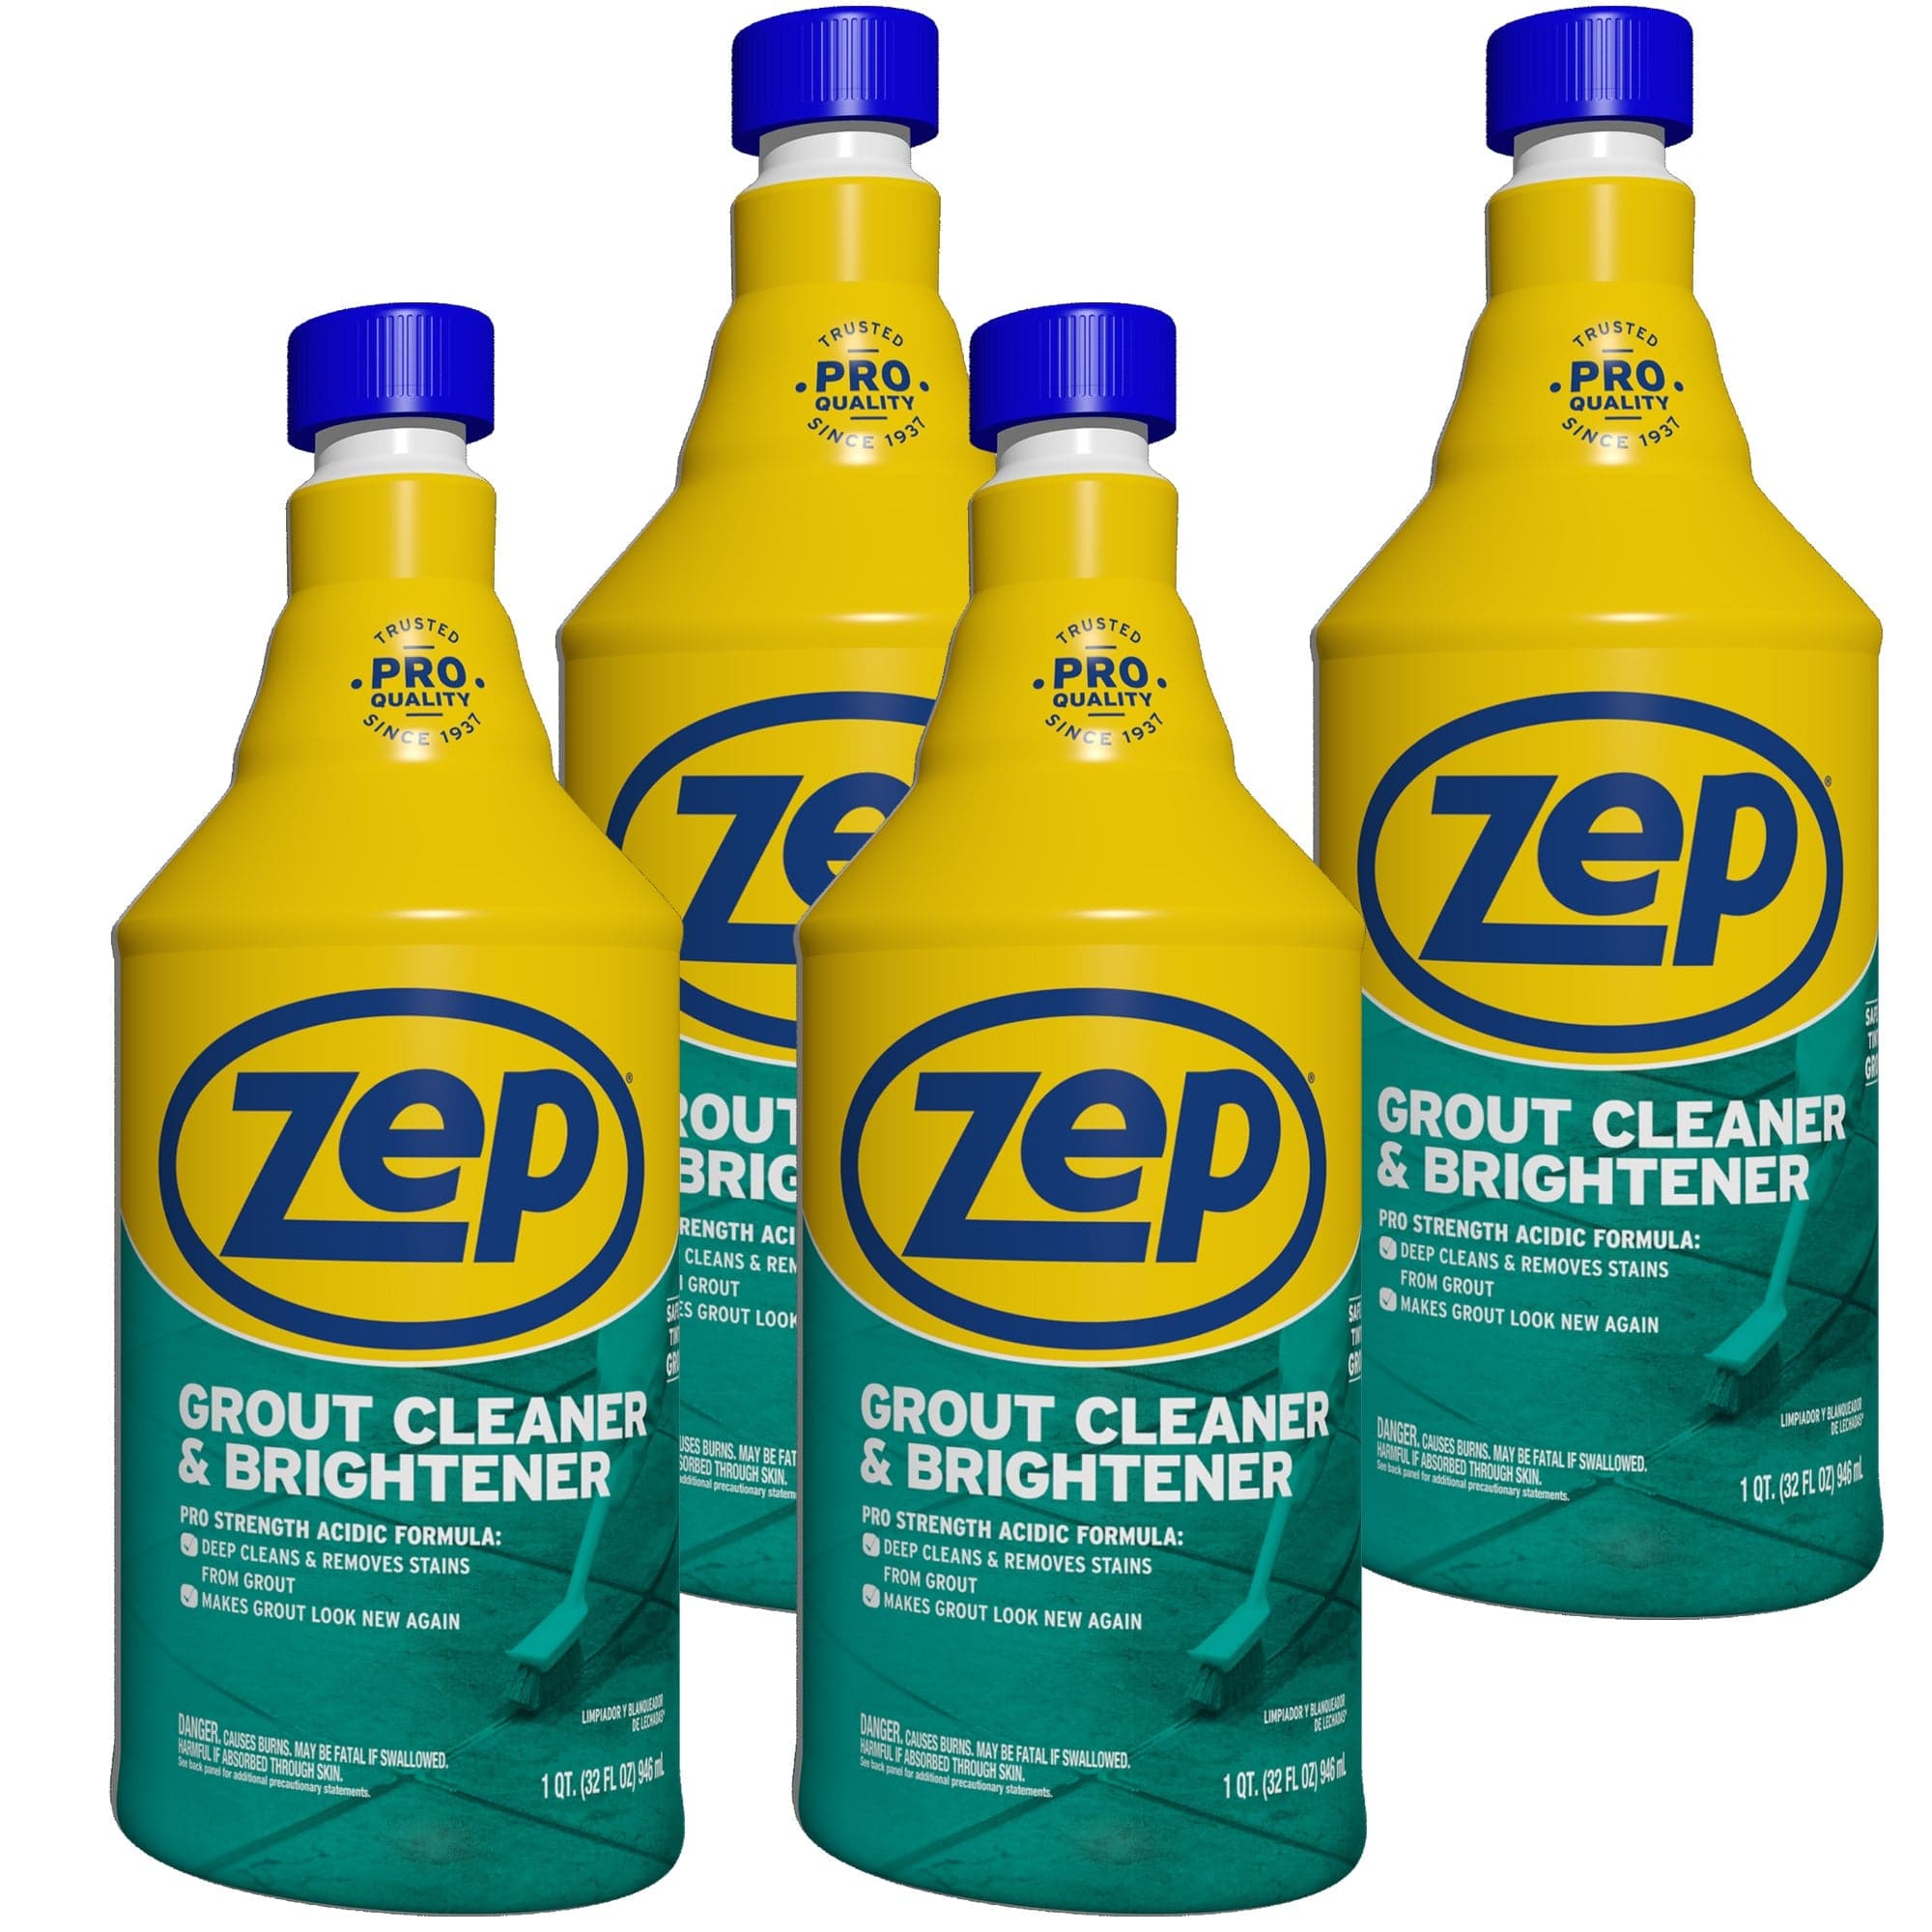 My Zep Grout Cleaner Review [Before And After Photos]